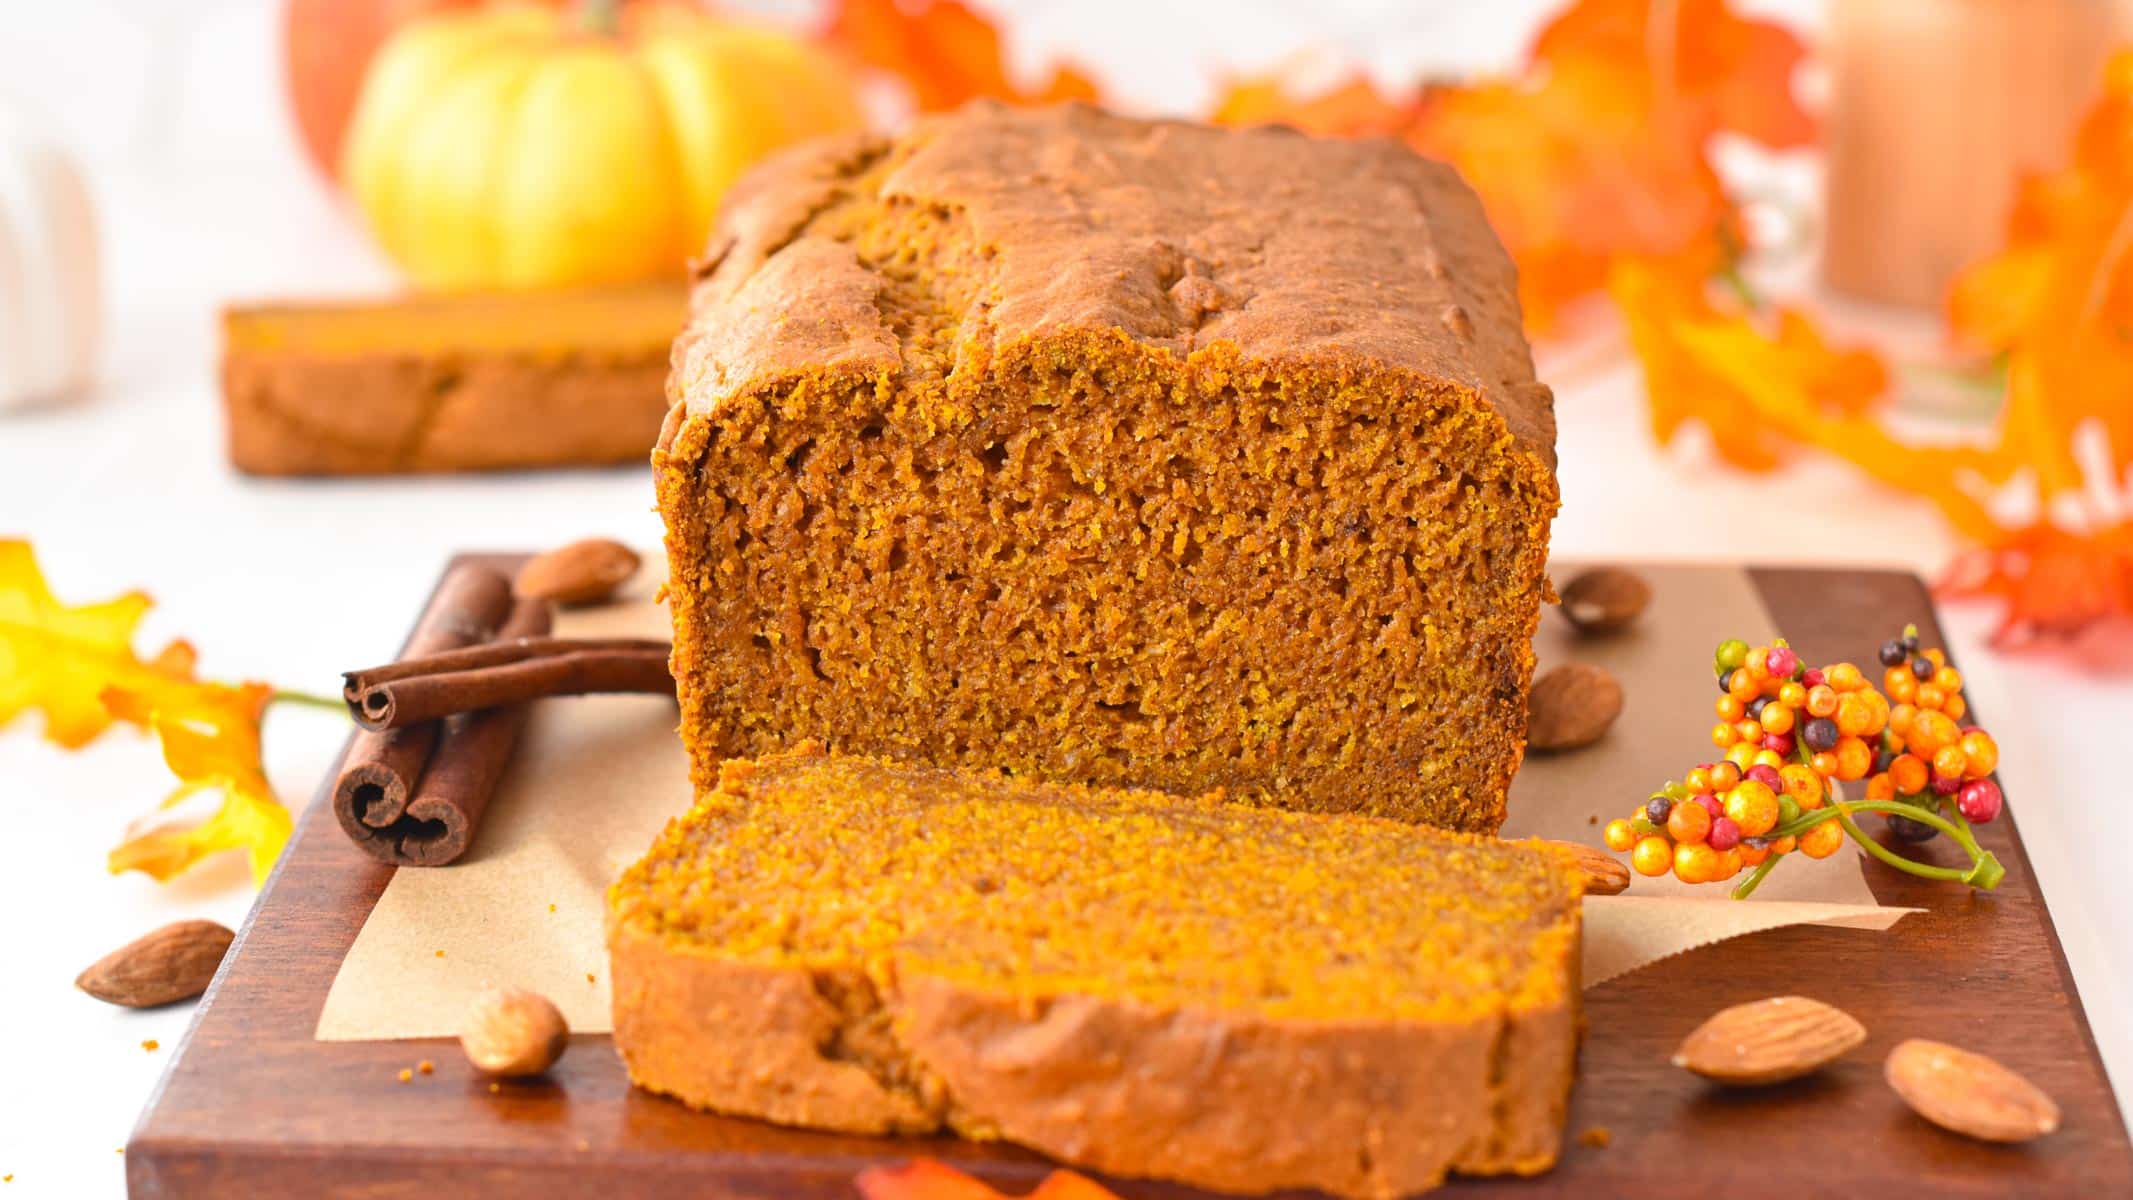 A sliced vegan gluten-free pumpkin bread with fall decoration in the background.